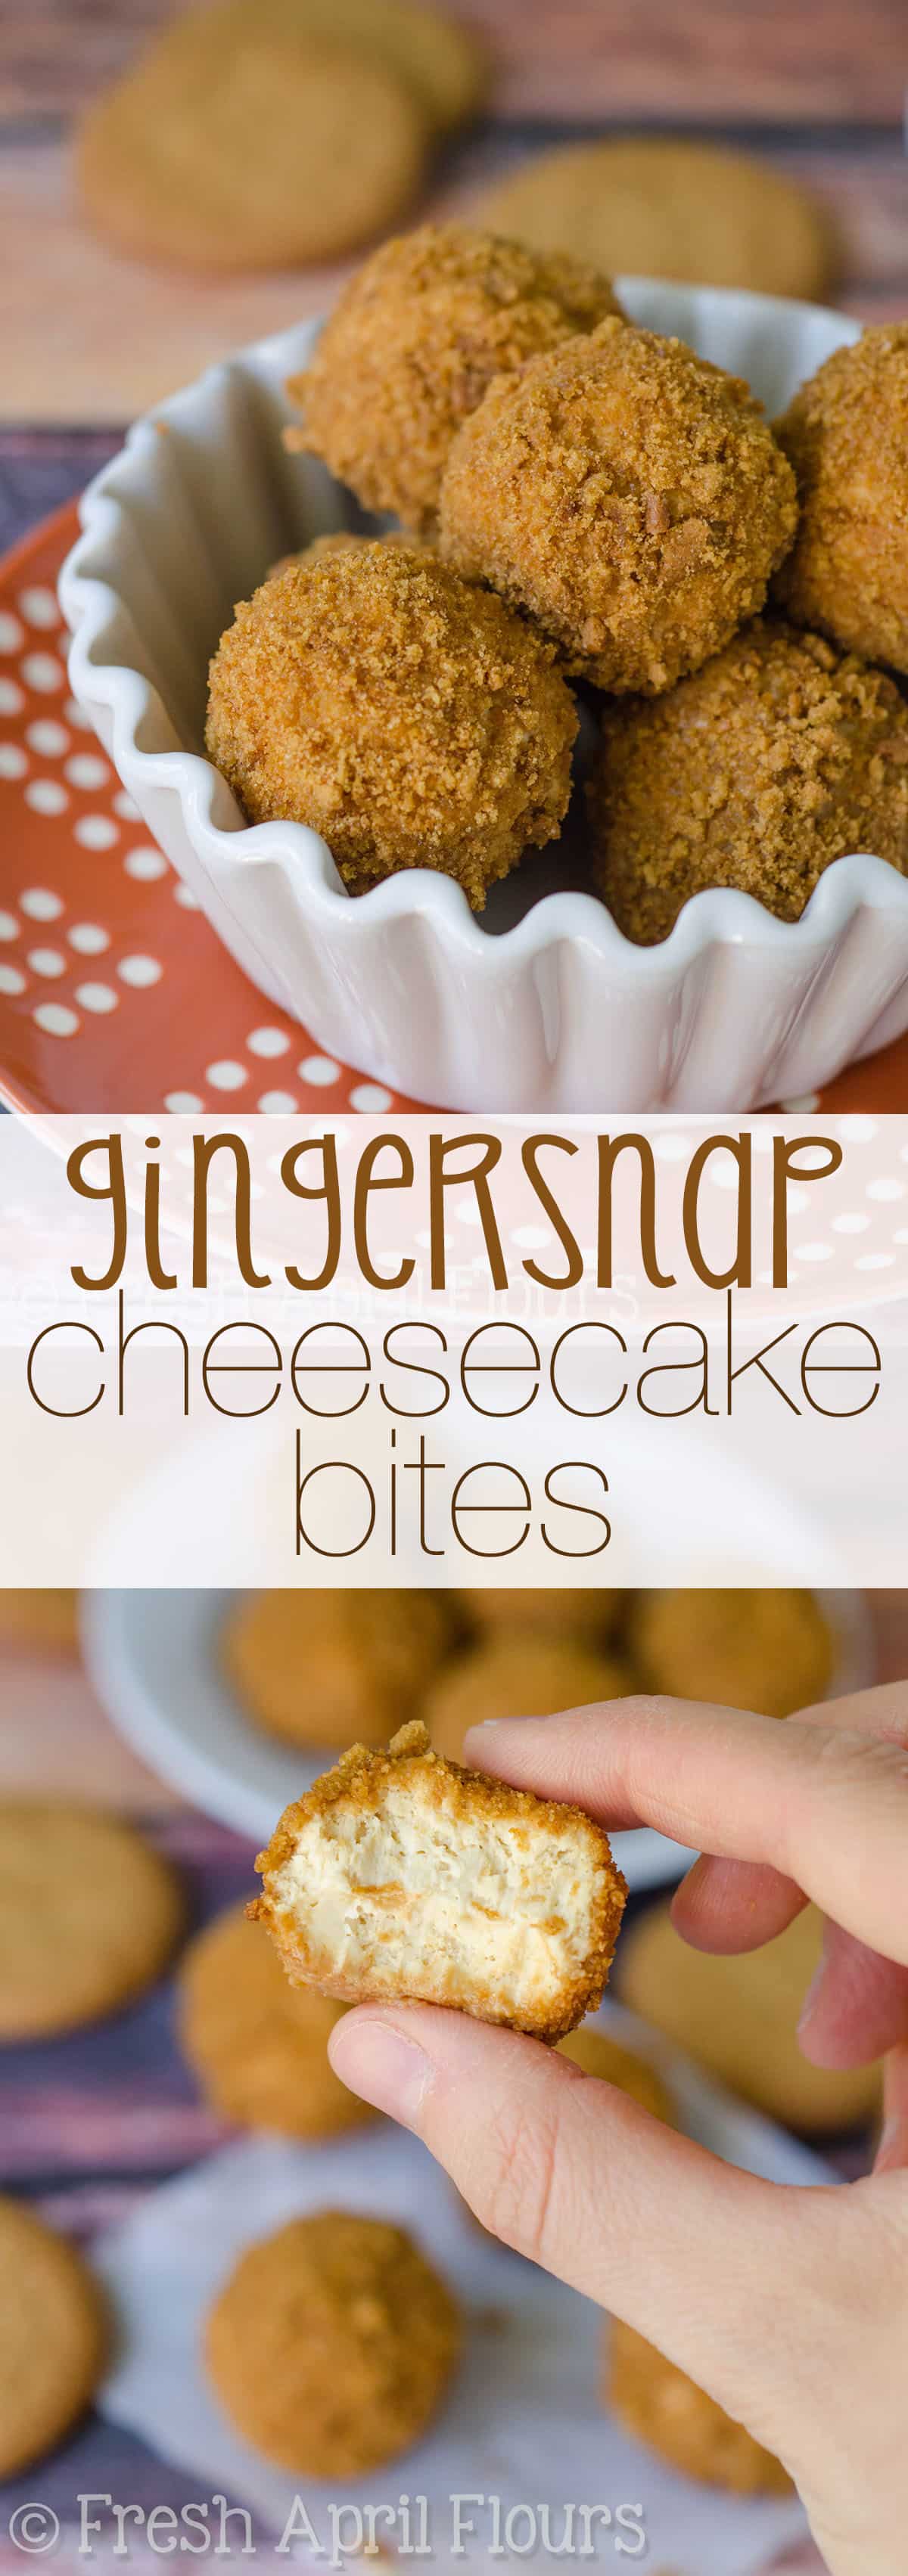 Easy, no bake cheesecake bites, rolled in a spicy gingersnap cookie coating. via @frshaprilflours